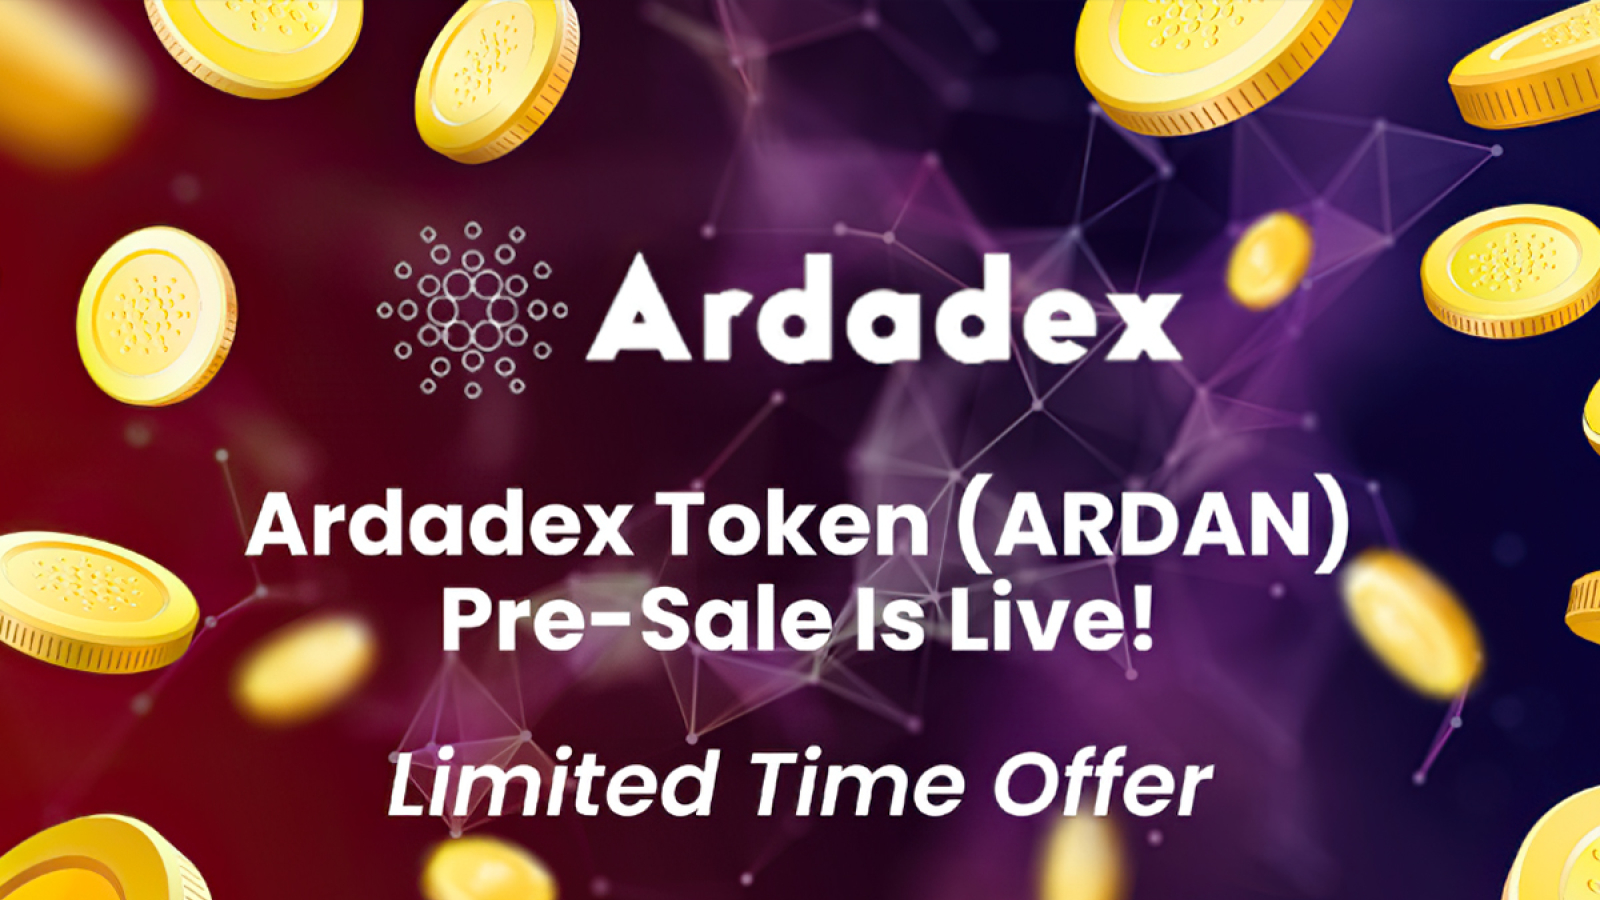 Ardadex Protocol First Stage Token Sale Is On Going With Limited Slots For Early Investors